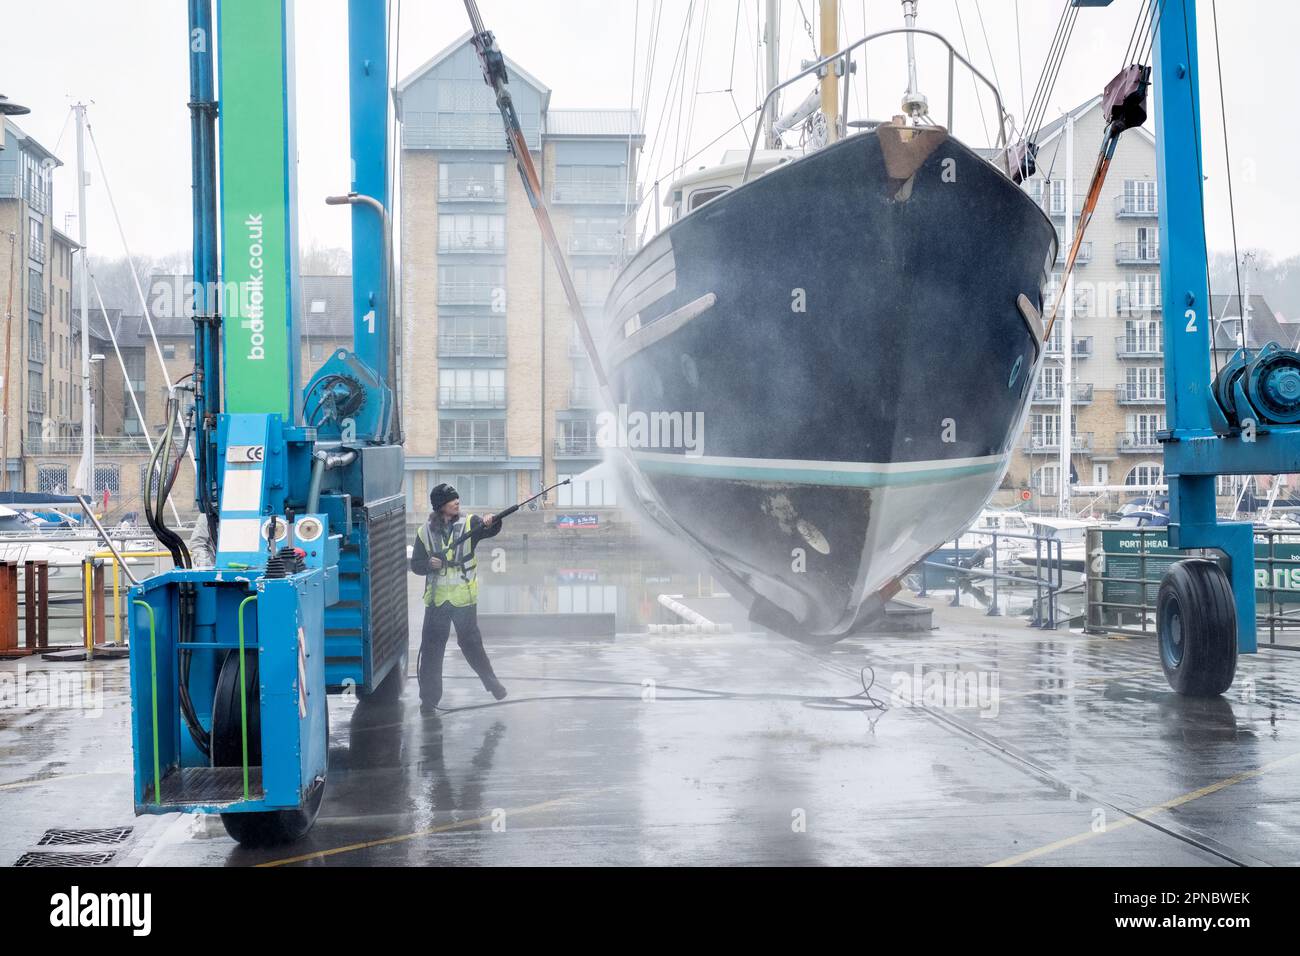 A female boat yard maintenance operator cleans the hull of a boat lifted from the water in Portishead Marina UK. the boat is held in a Wise Boat Hoist Stock Photo